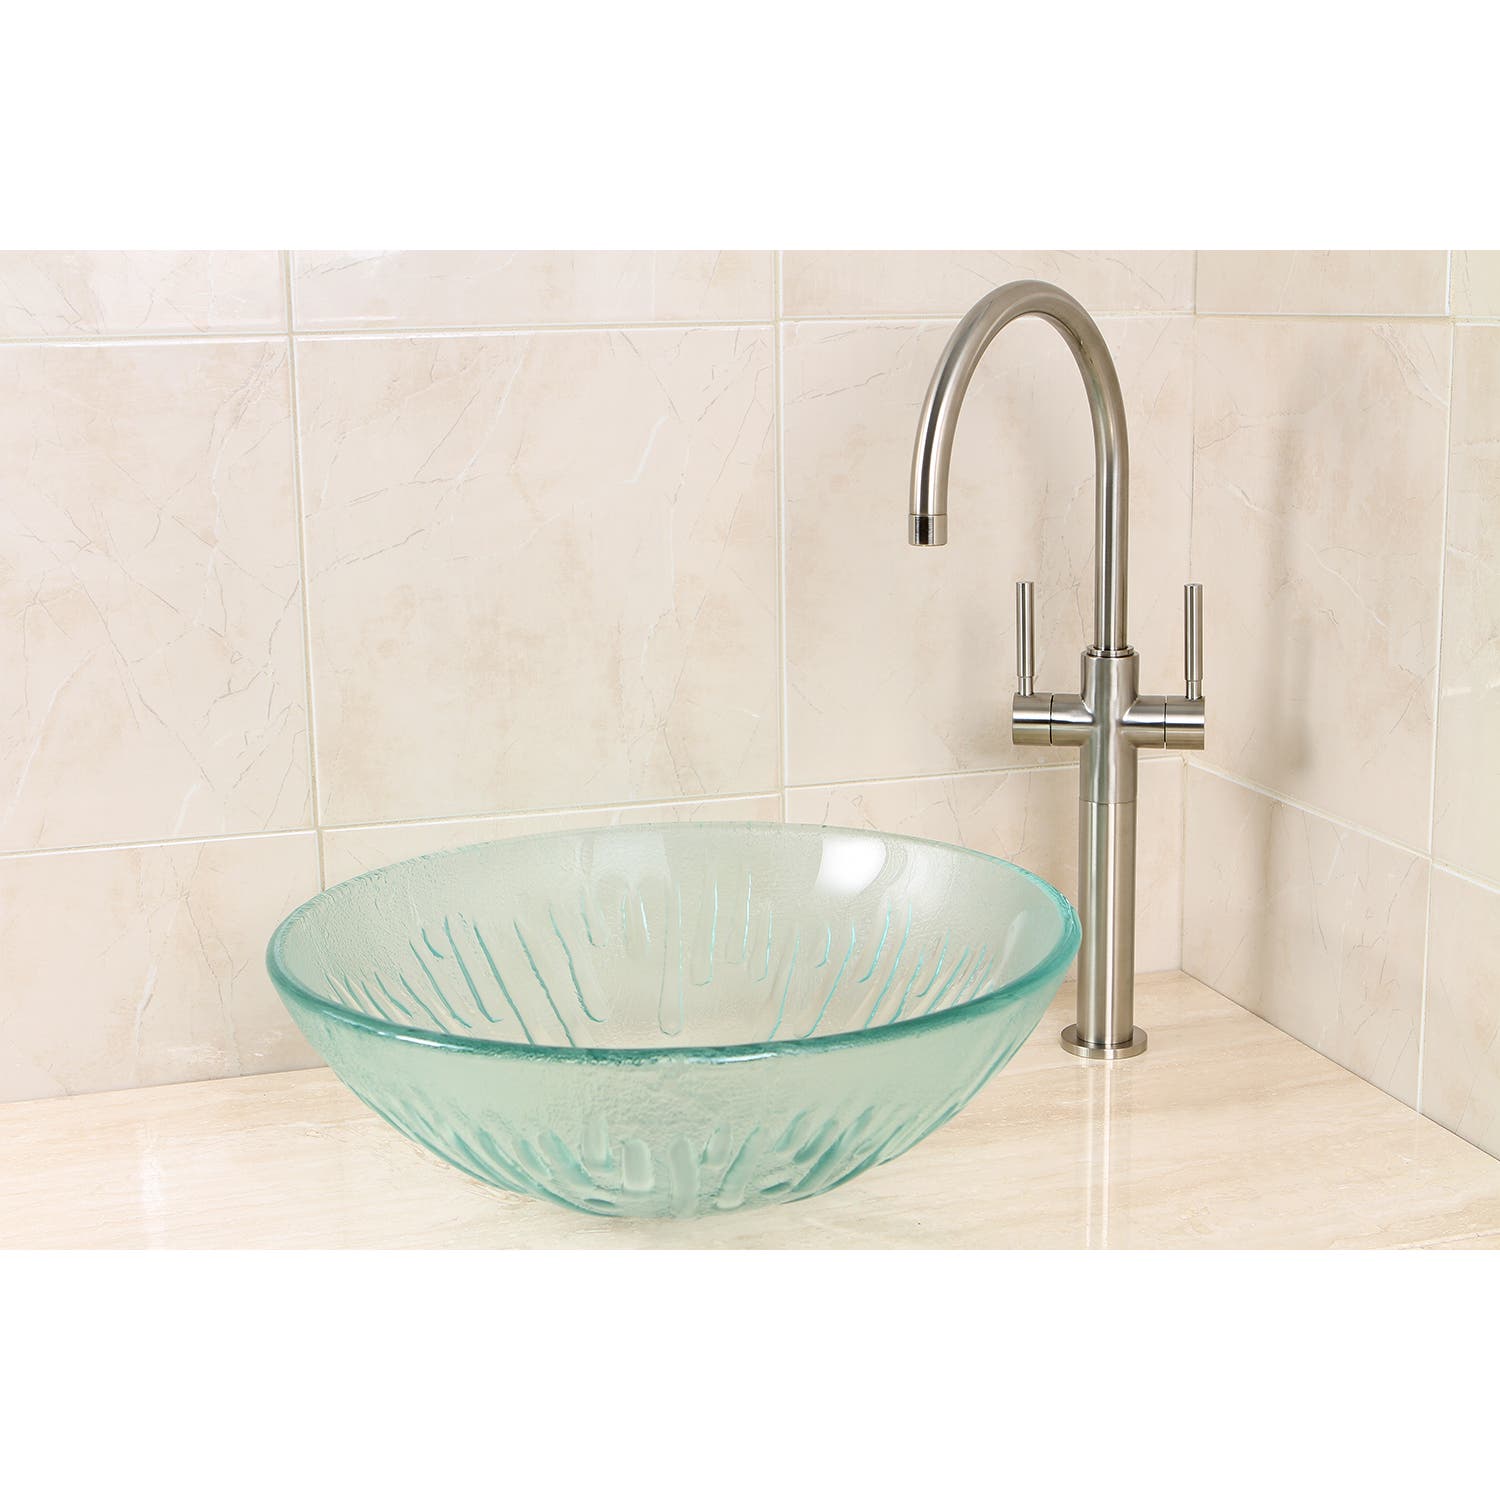 Bring the Beach Home with an Ocean Inspired Vessel Sink by Fauceture, EVSCFC3